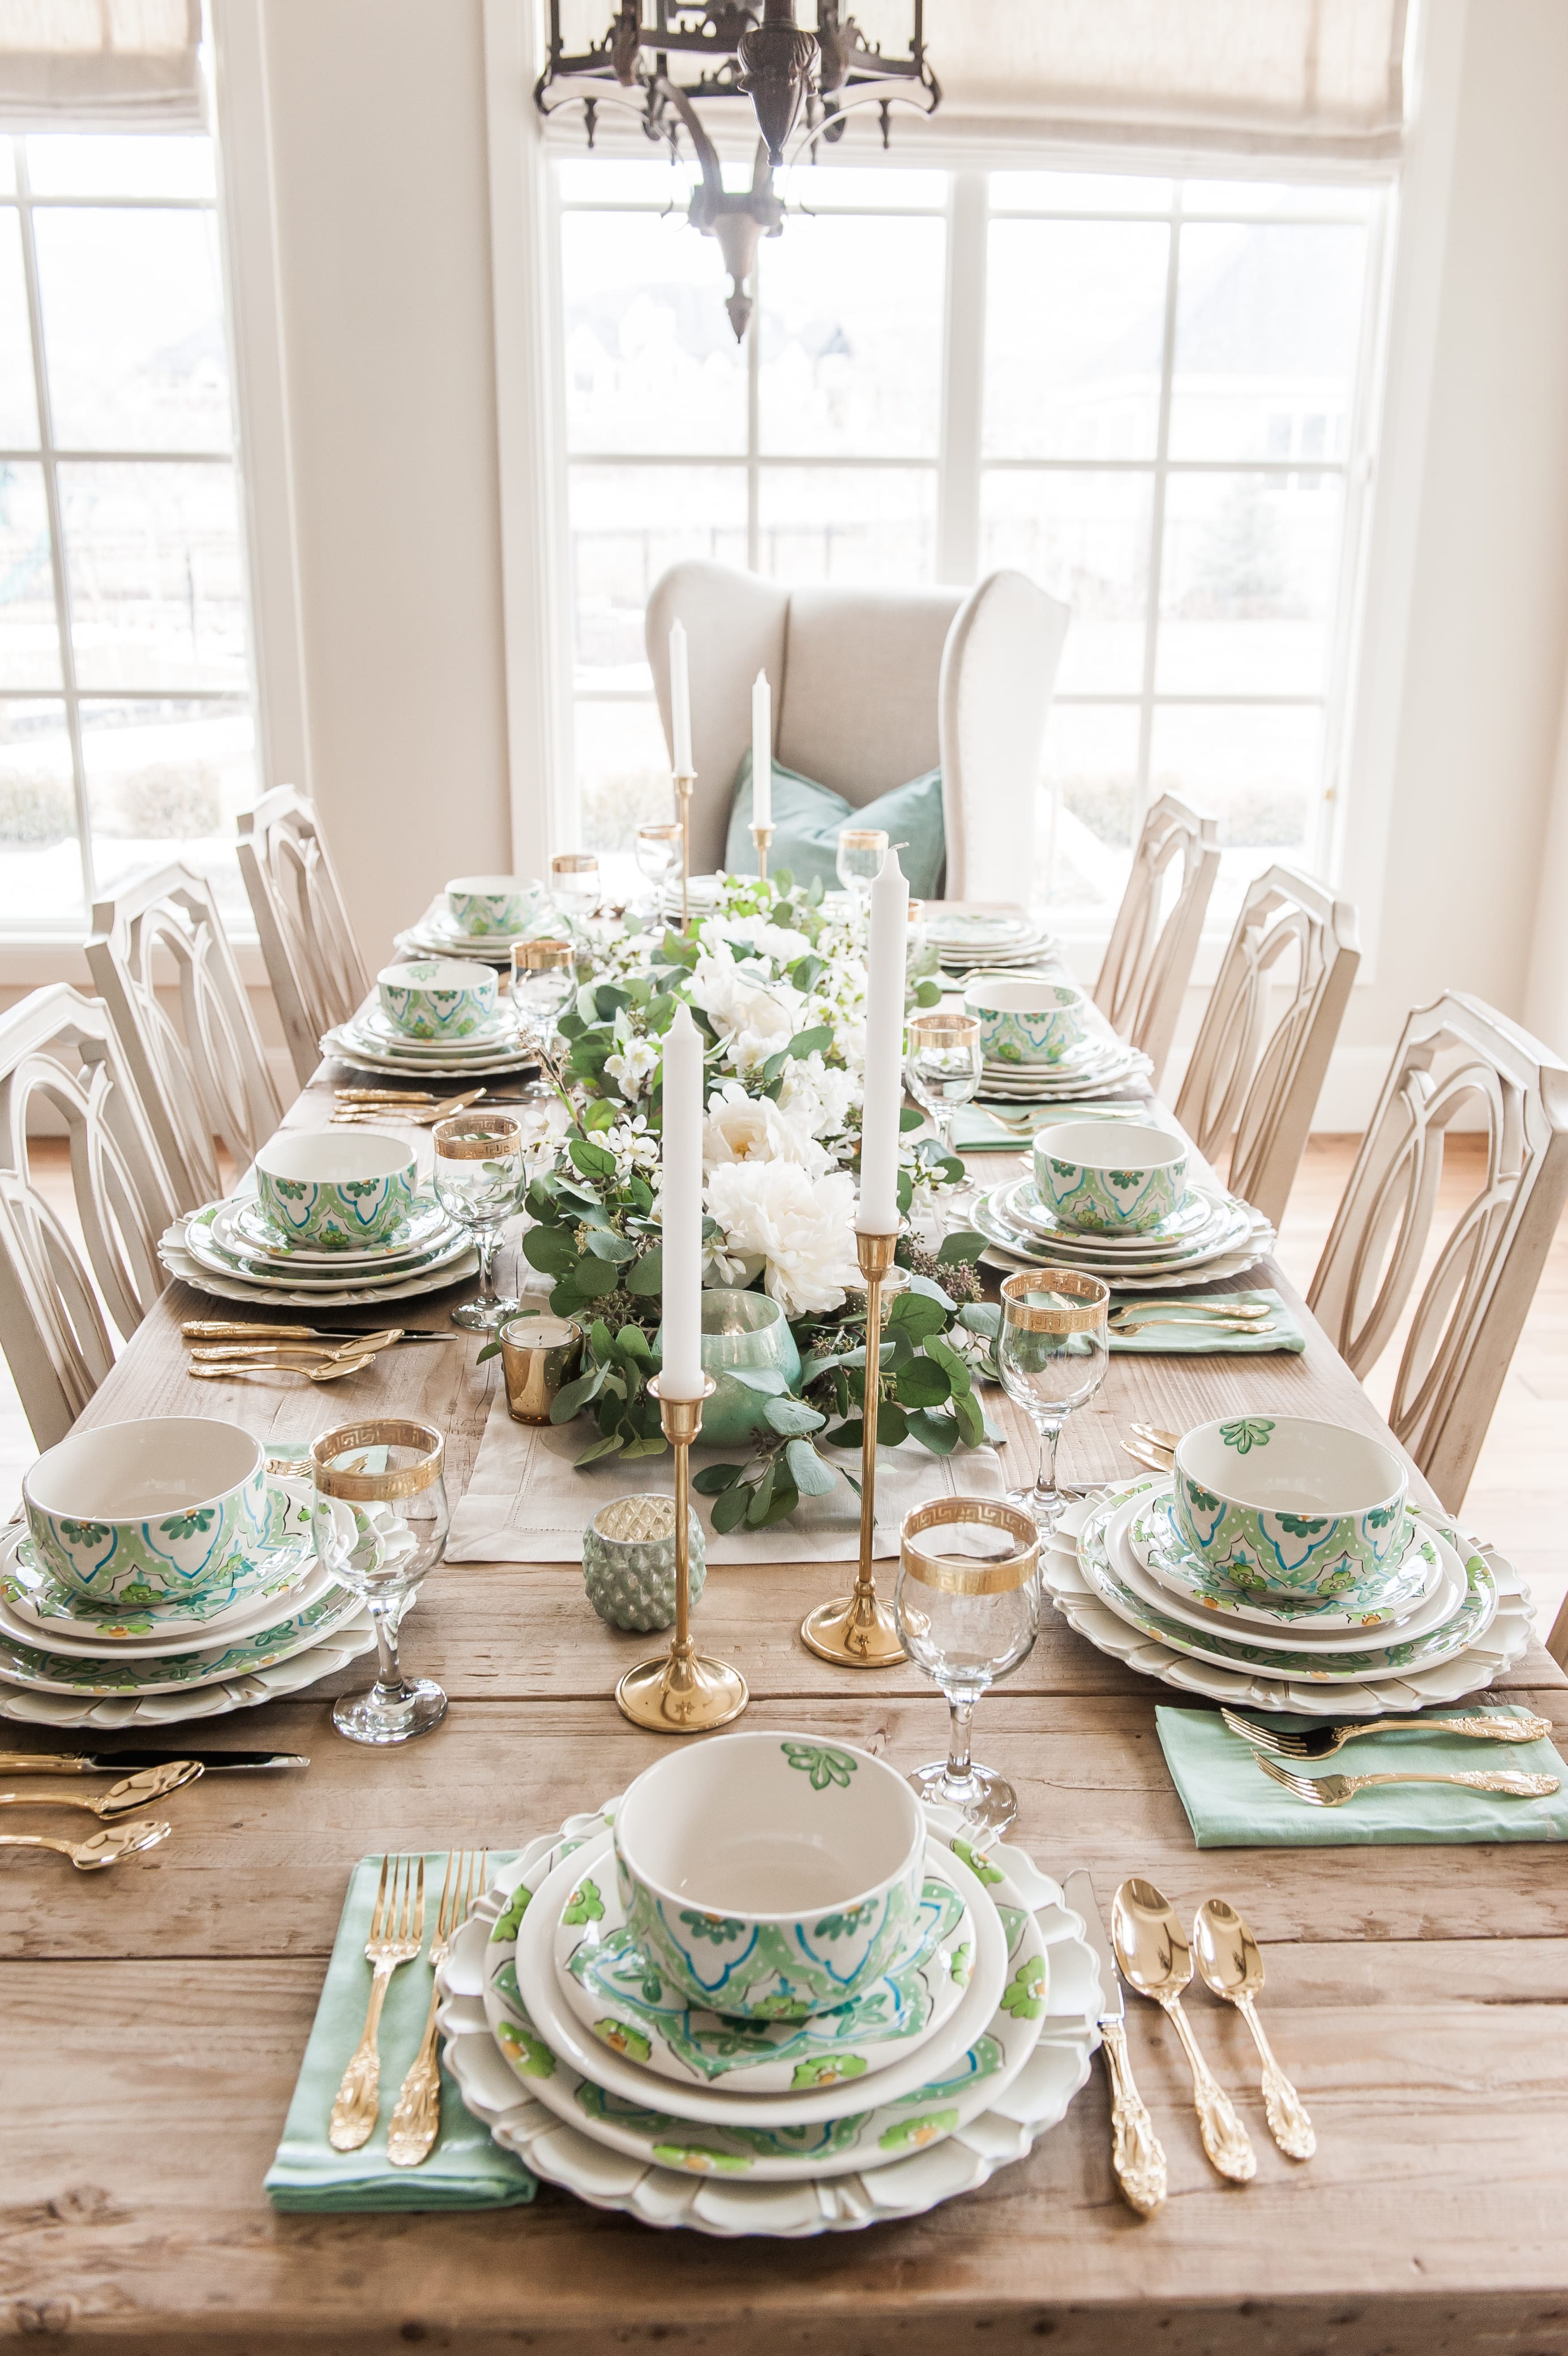 Tablescape spring Tablescapes st. patricks day table decor blue green and white table setting dinnerware easter tablescape easter dinner table dining room table setting place setting table decor ideas